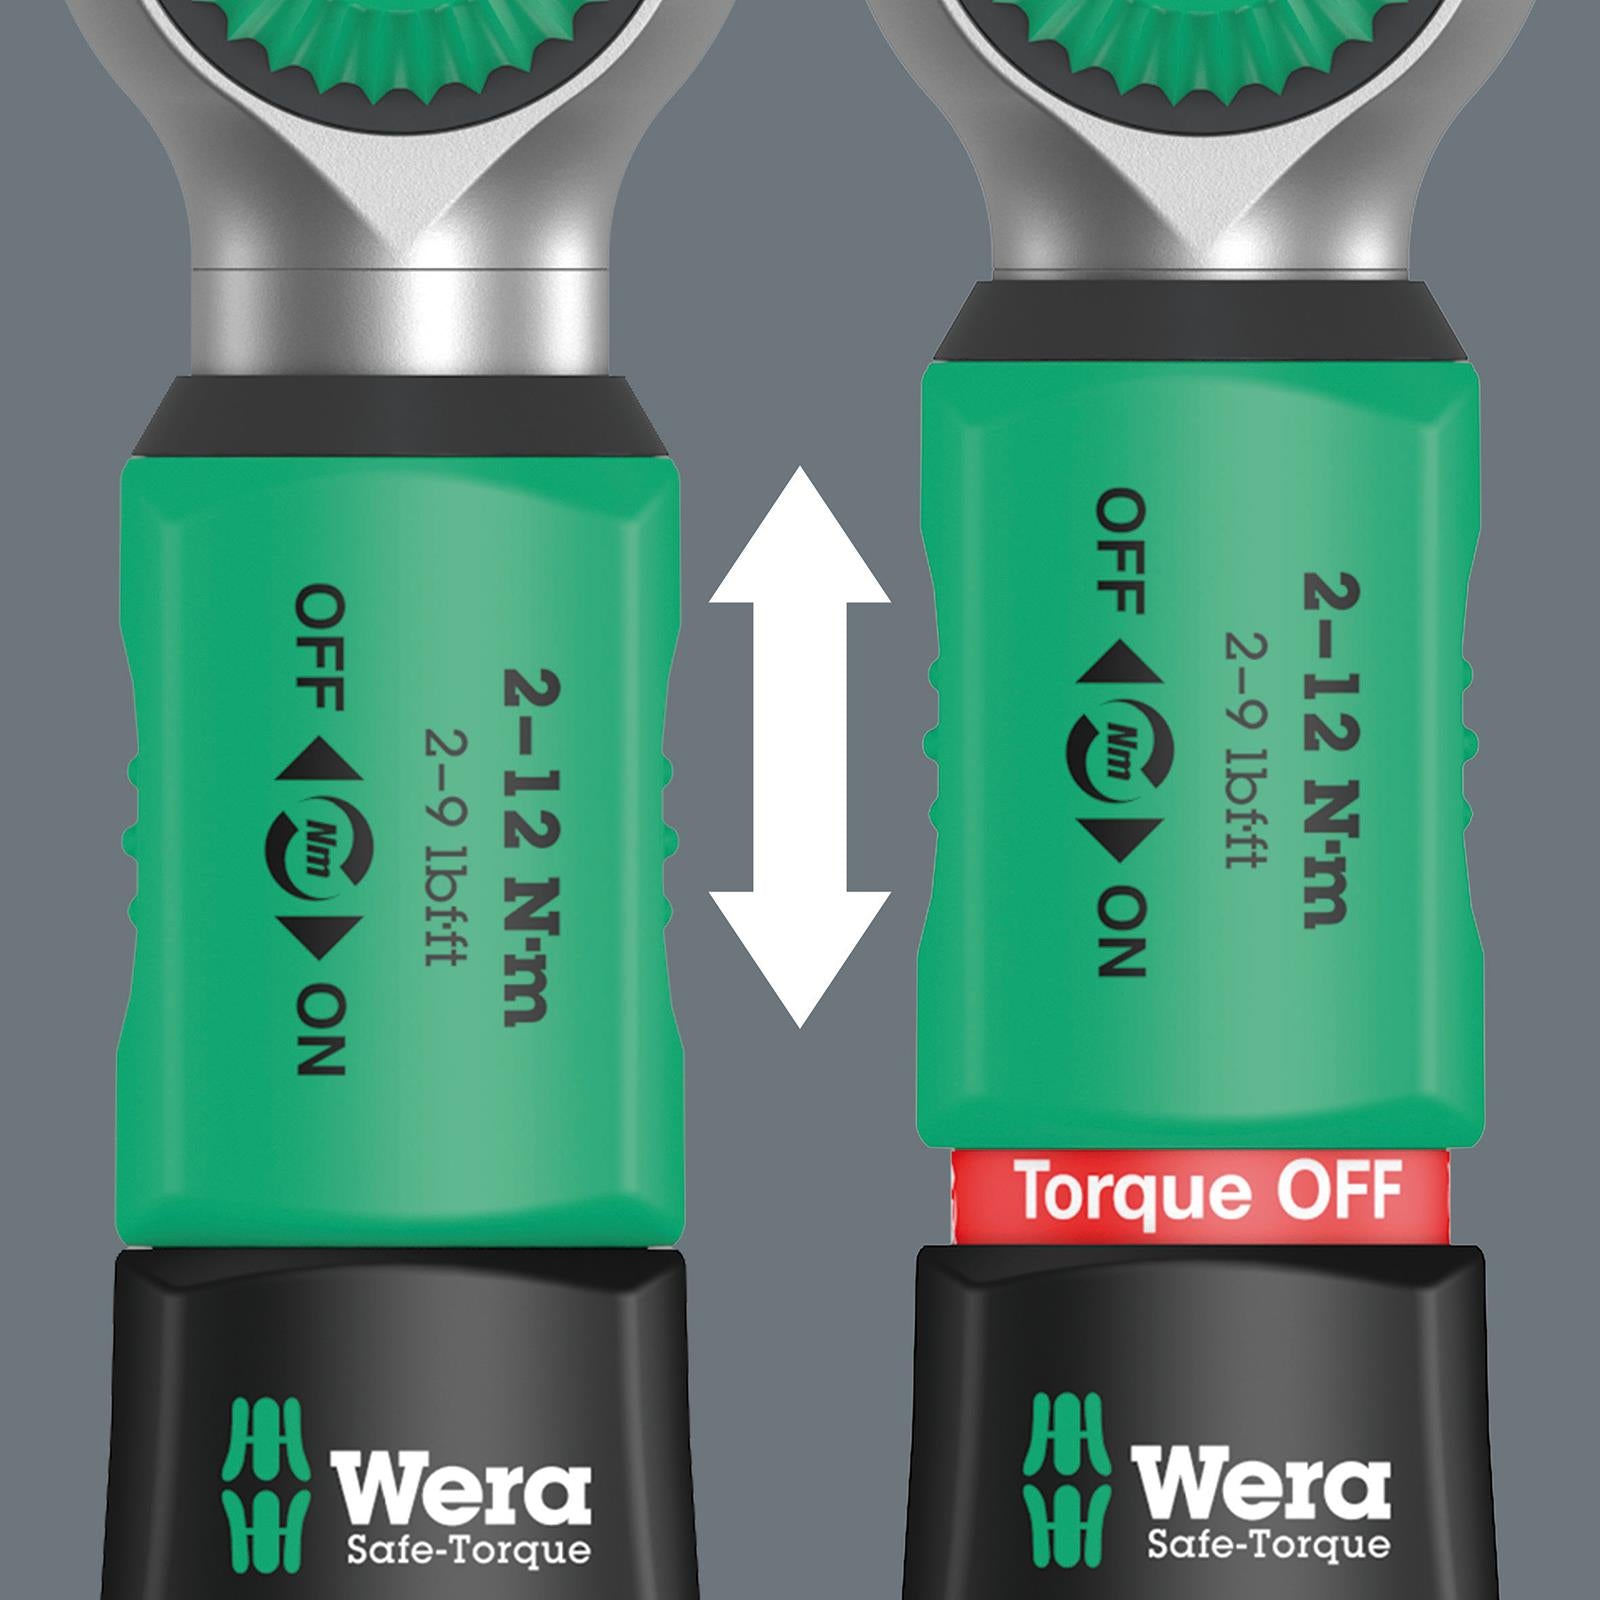 Wera Torque Wrench Safe-Torque A 2 Set 1 1/4" Hex Drive 2-12 Nm 23 Pieces Reversible